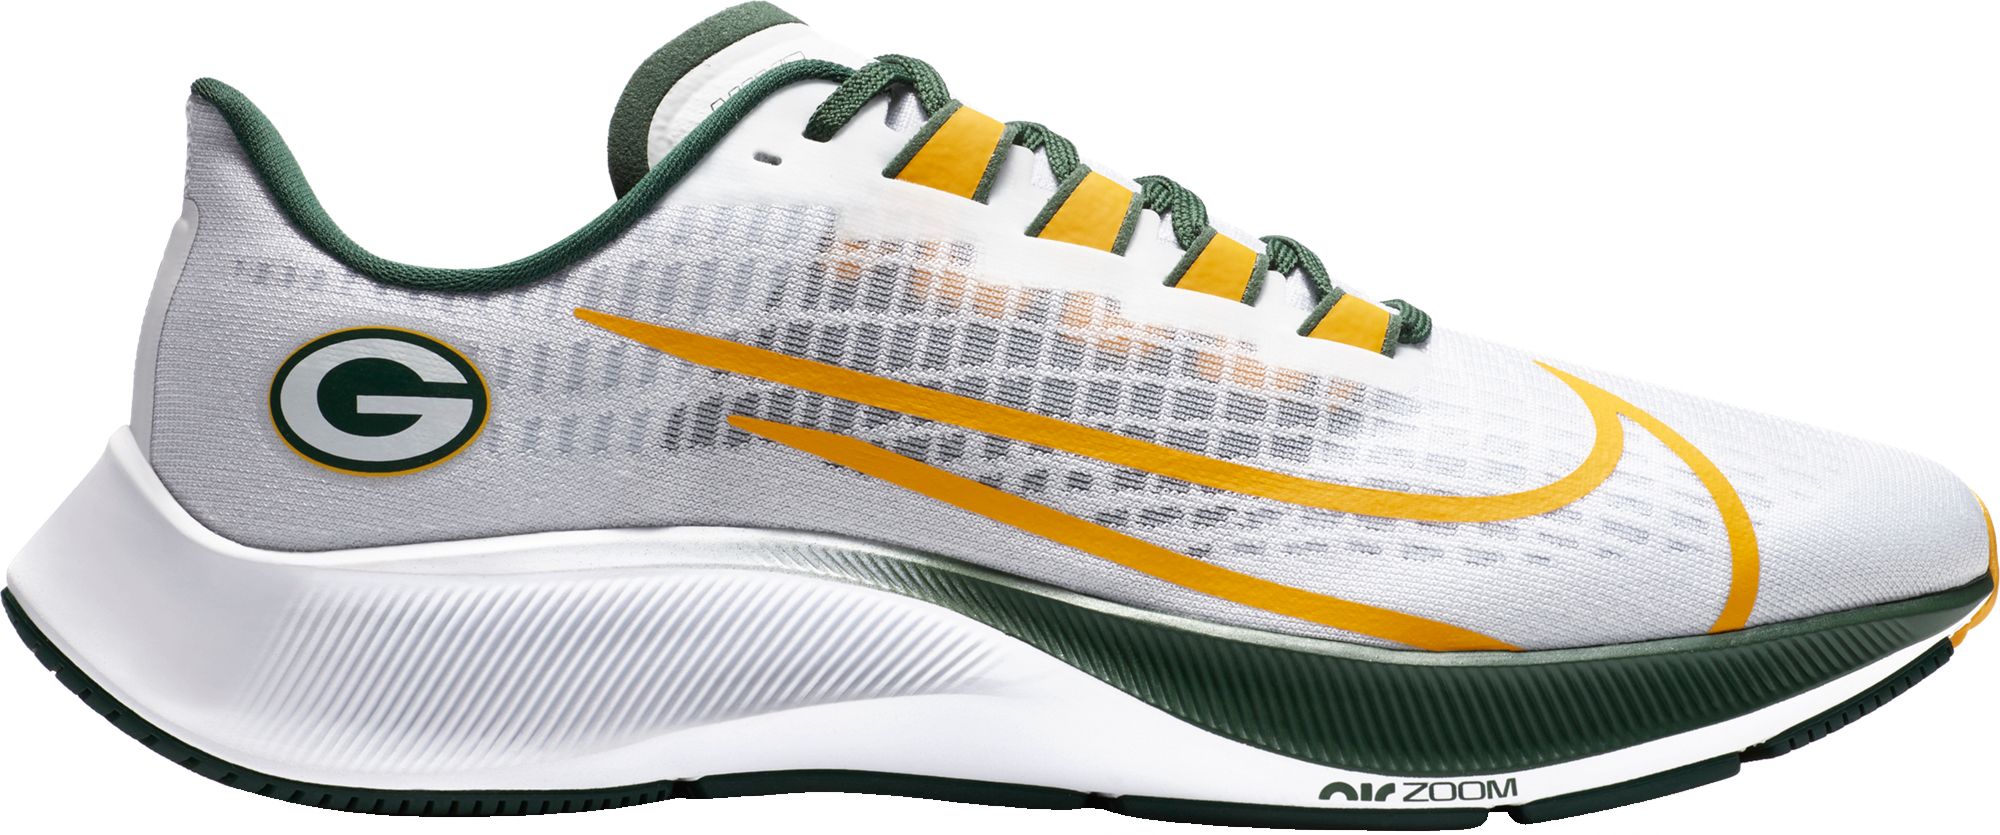 the bay nike running shoes